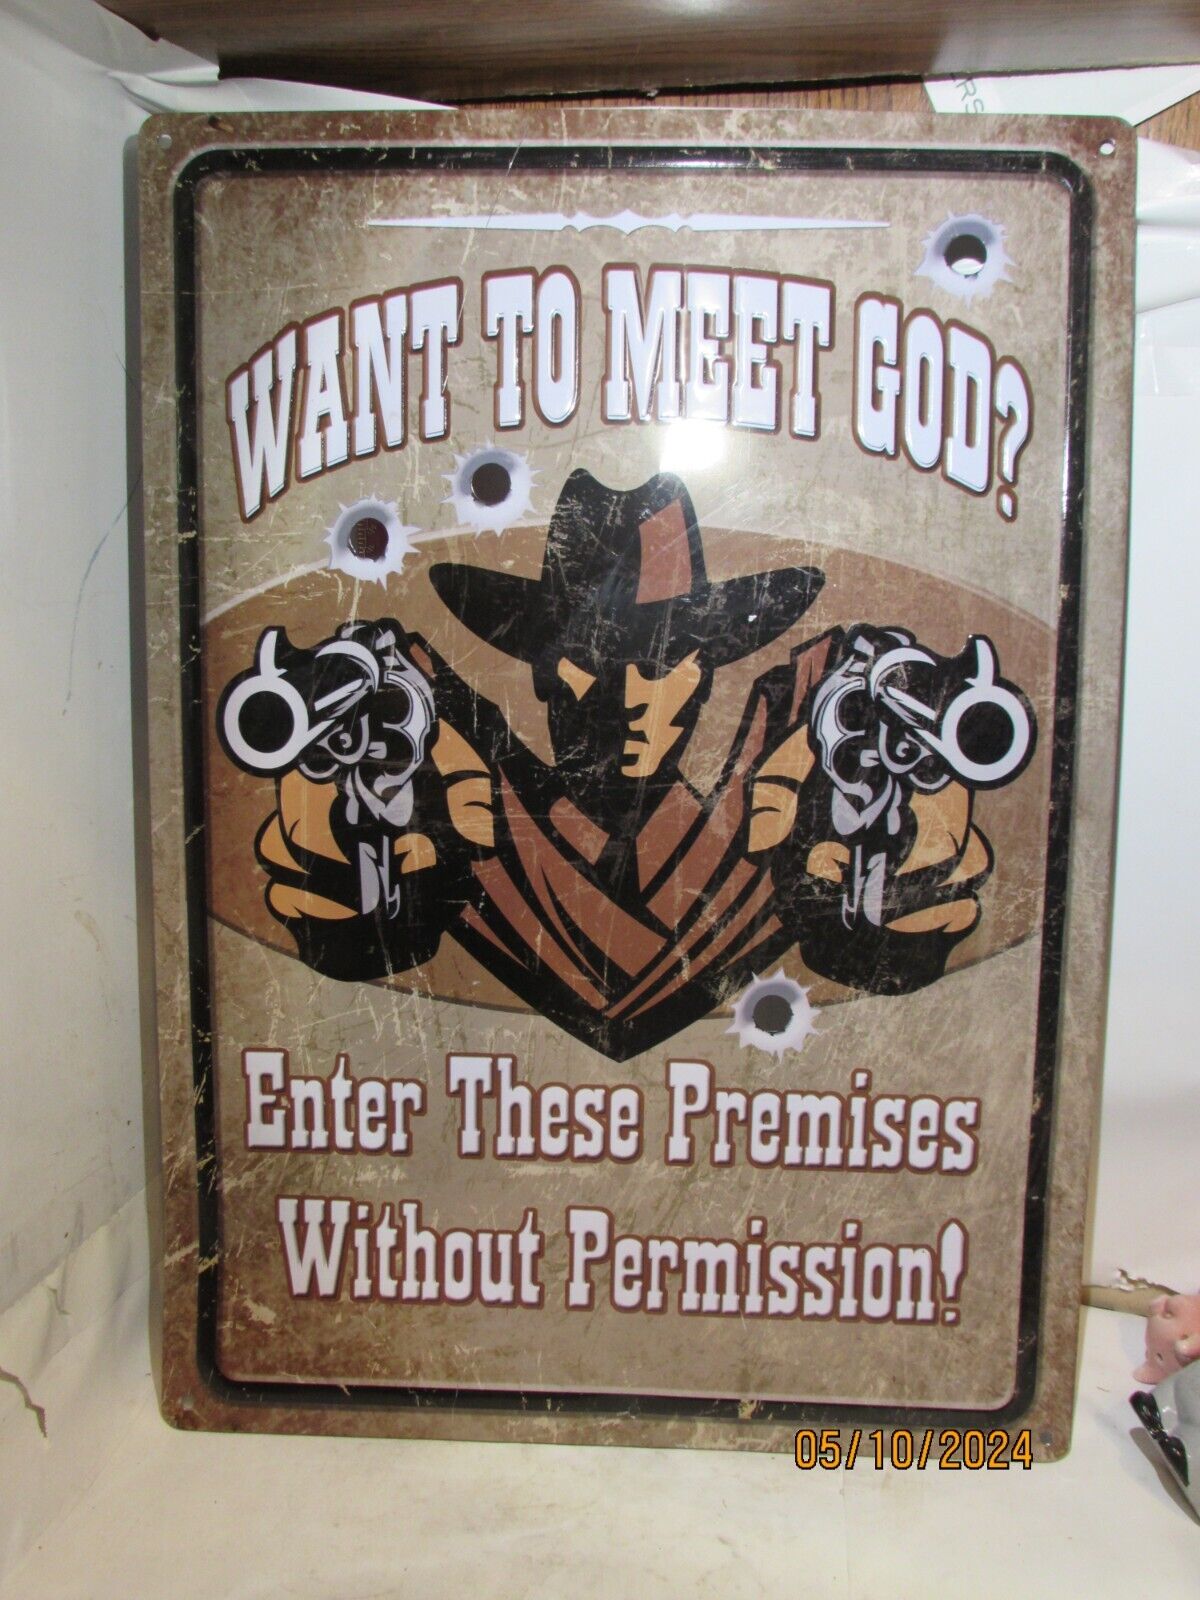 RIVERS EDGE PRODUCTS HUMOROUS SIGN - WANT TO MEET GOD?